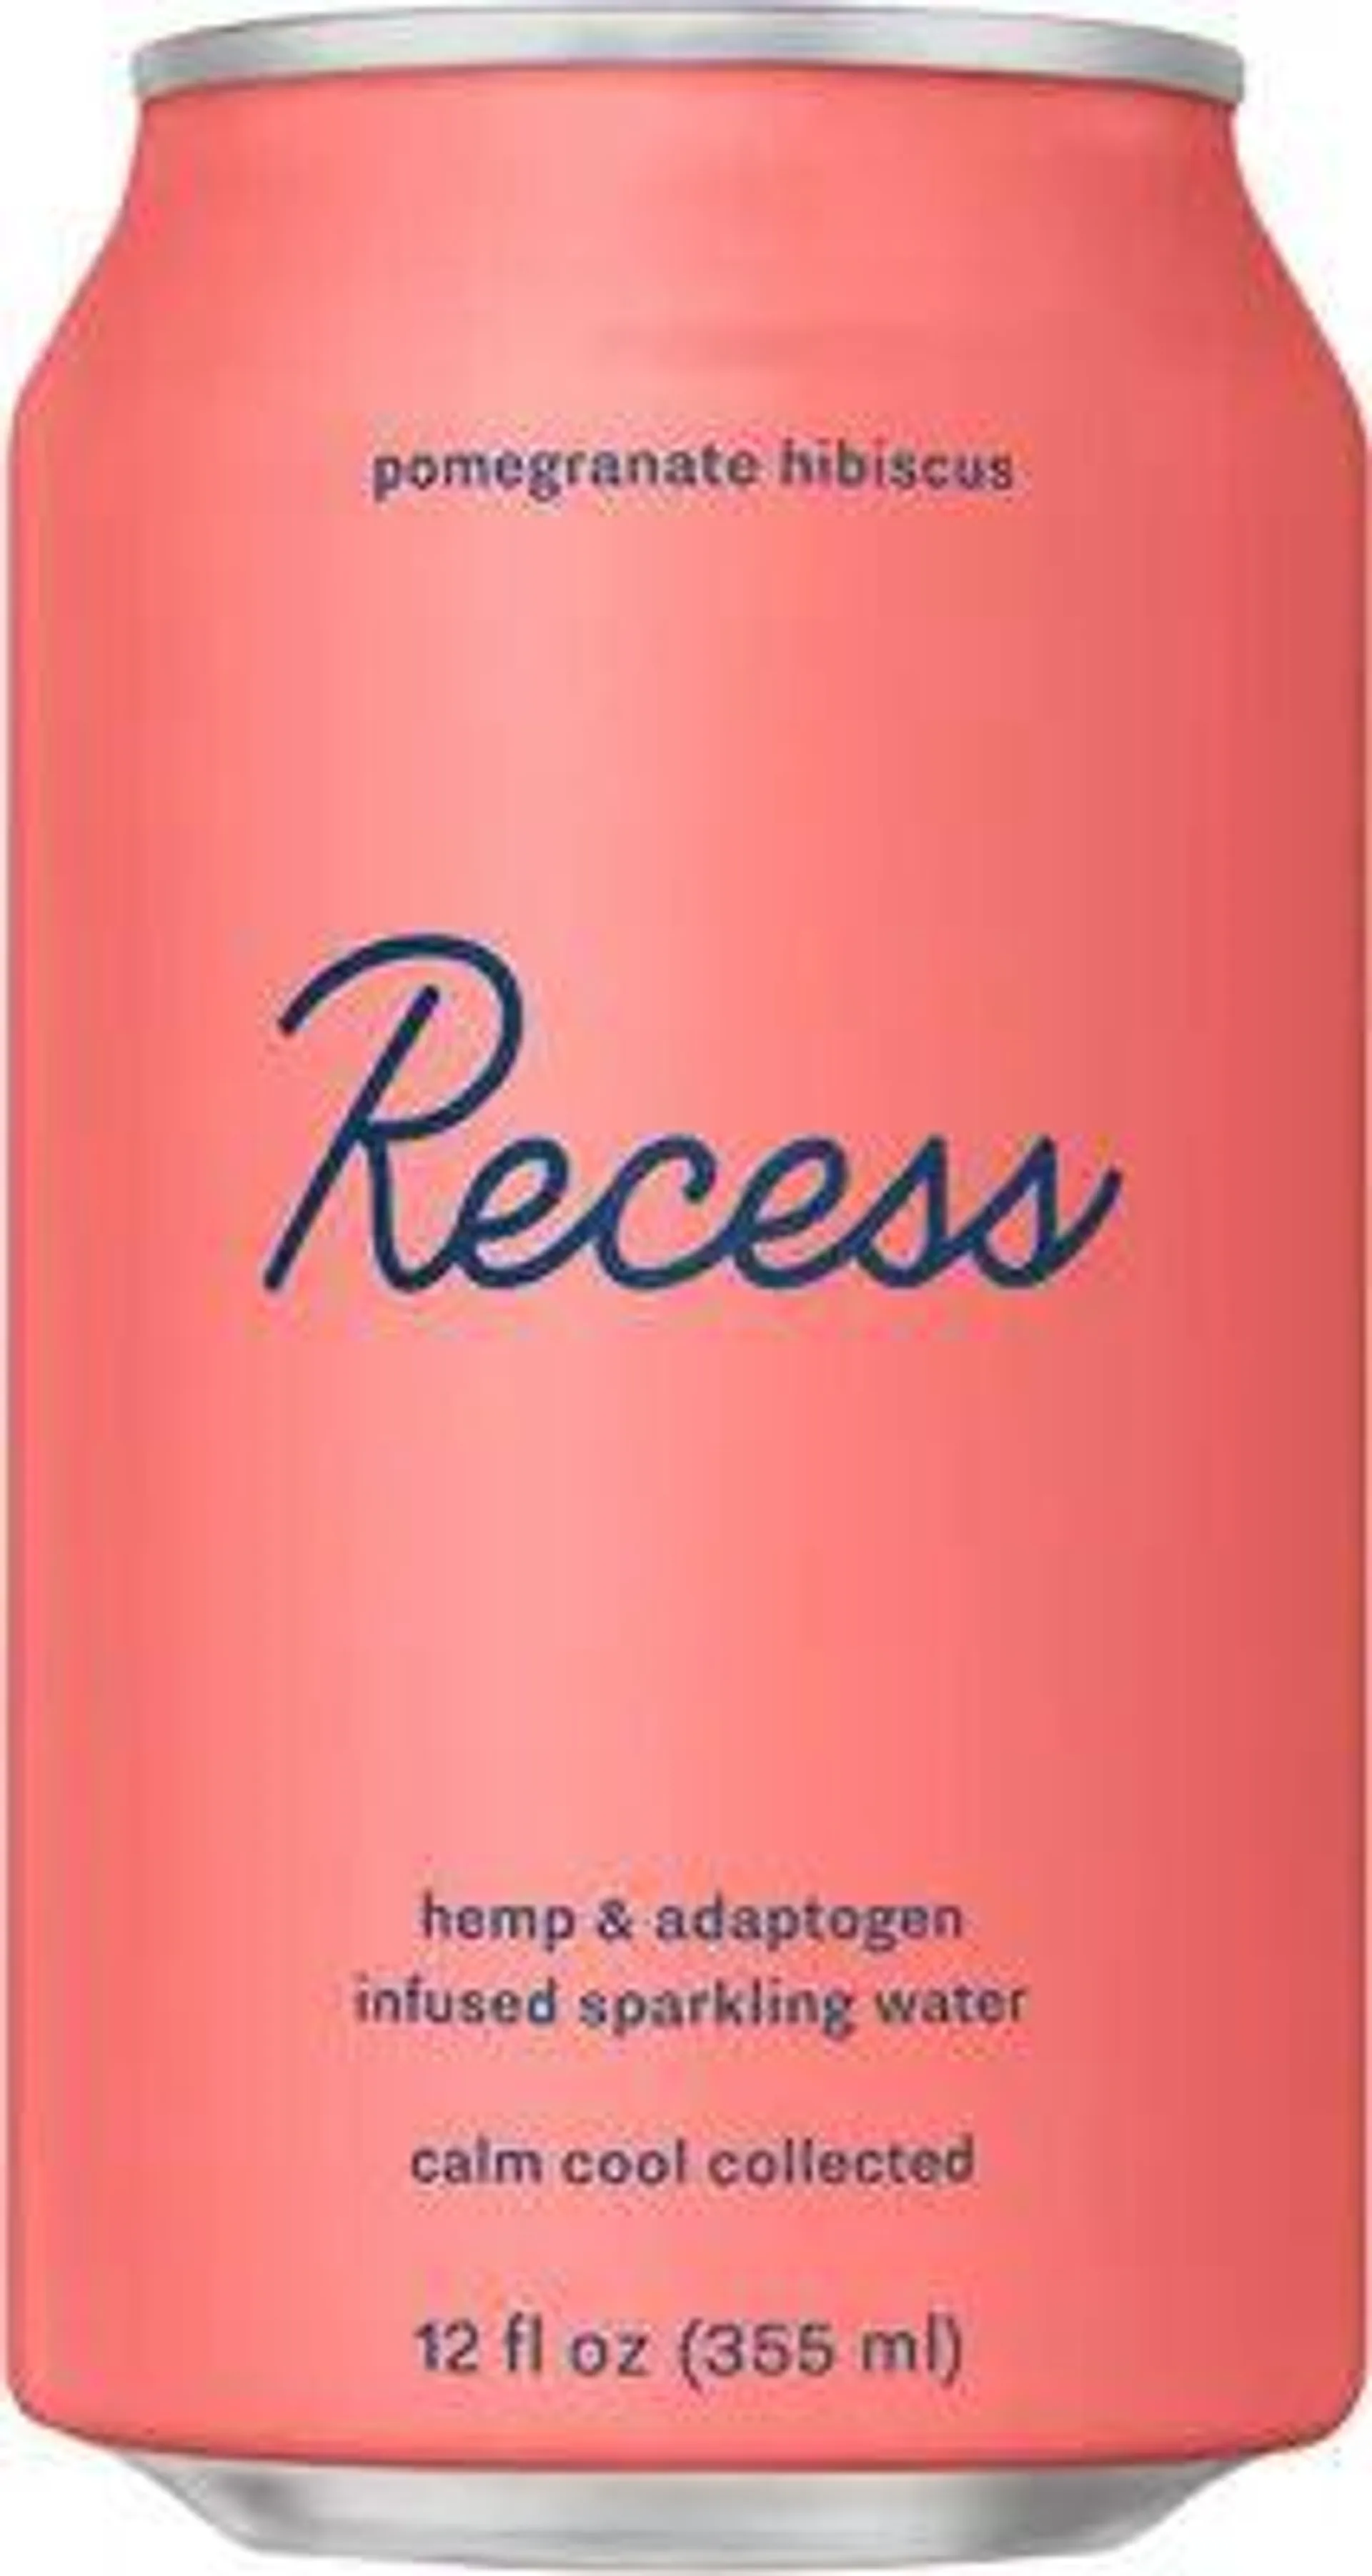 Recess Pomegranate Hibiscus Sparkling Water Infused with Hemp